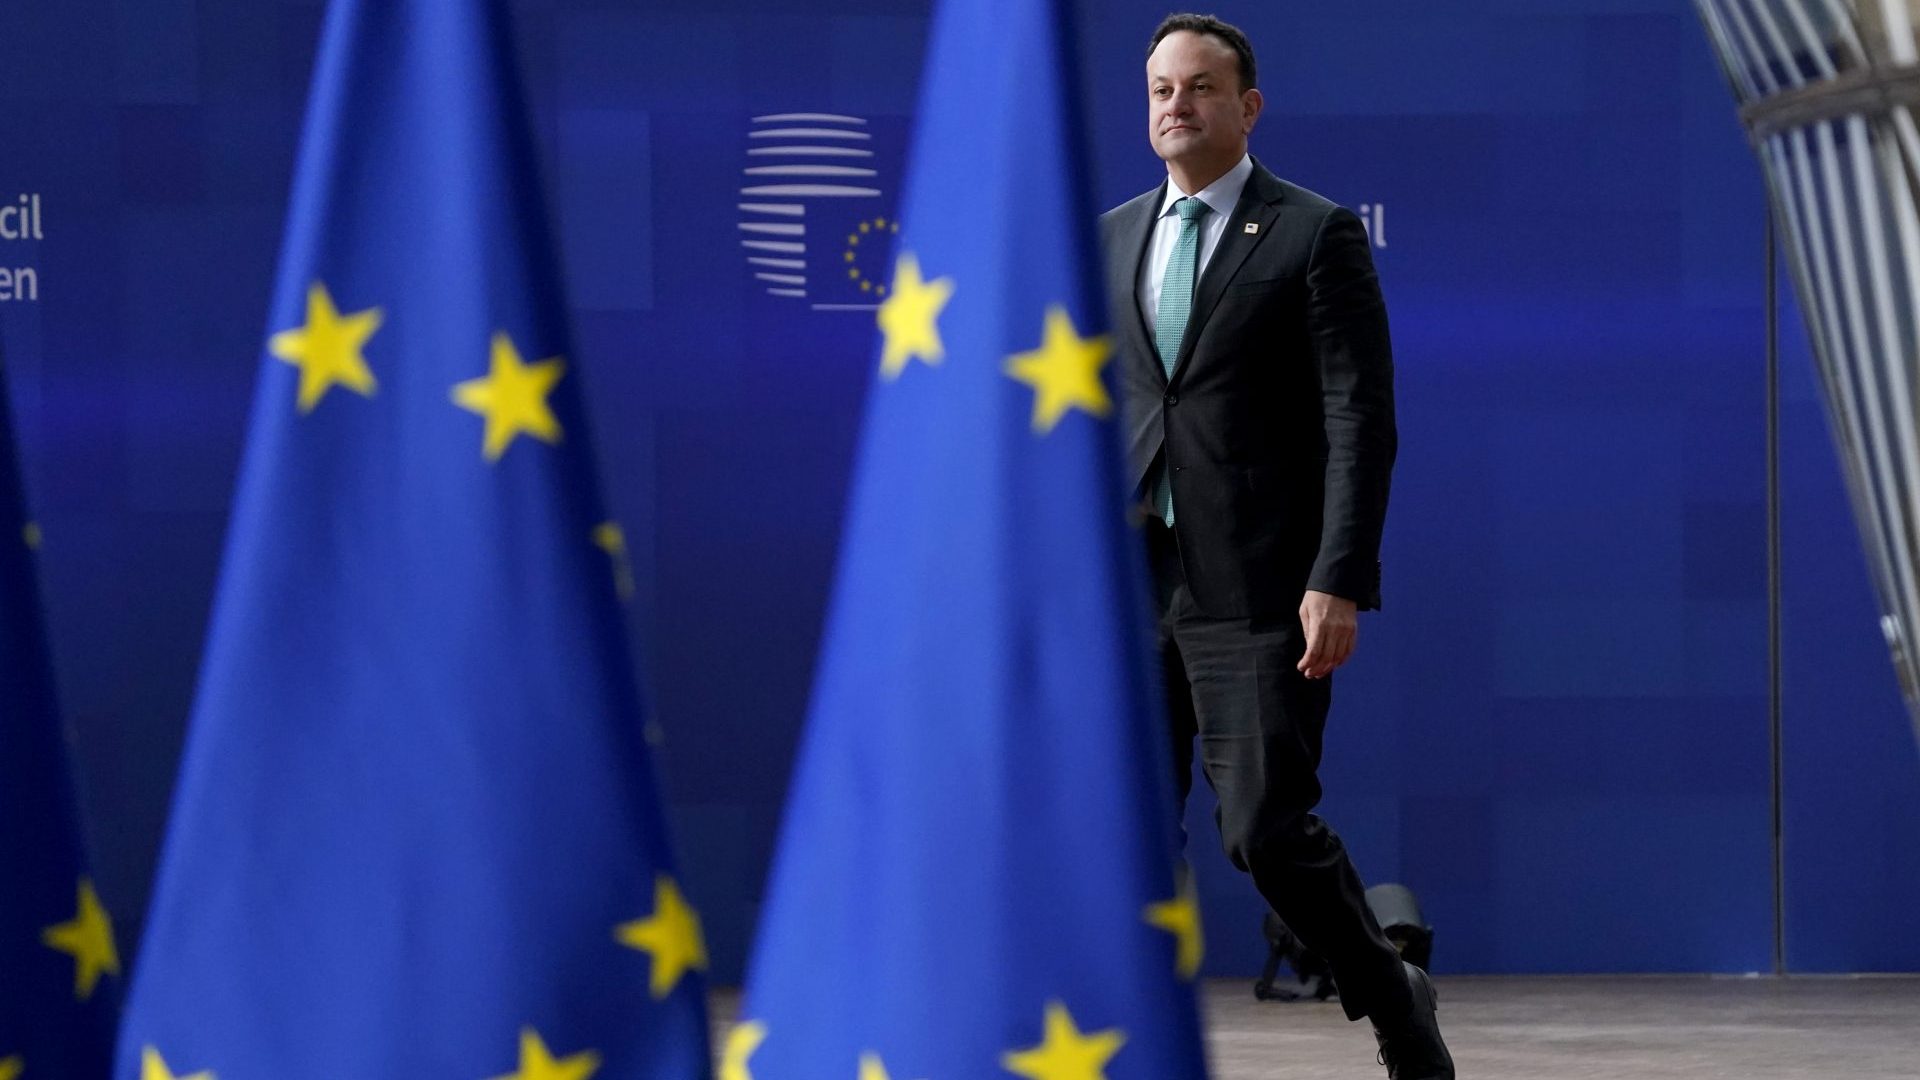 Leo Varadkar arrives at European Council Meeting. Photo: Pier Marco Tacca/Getty Images